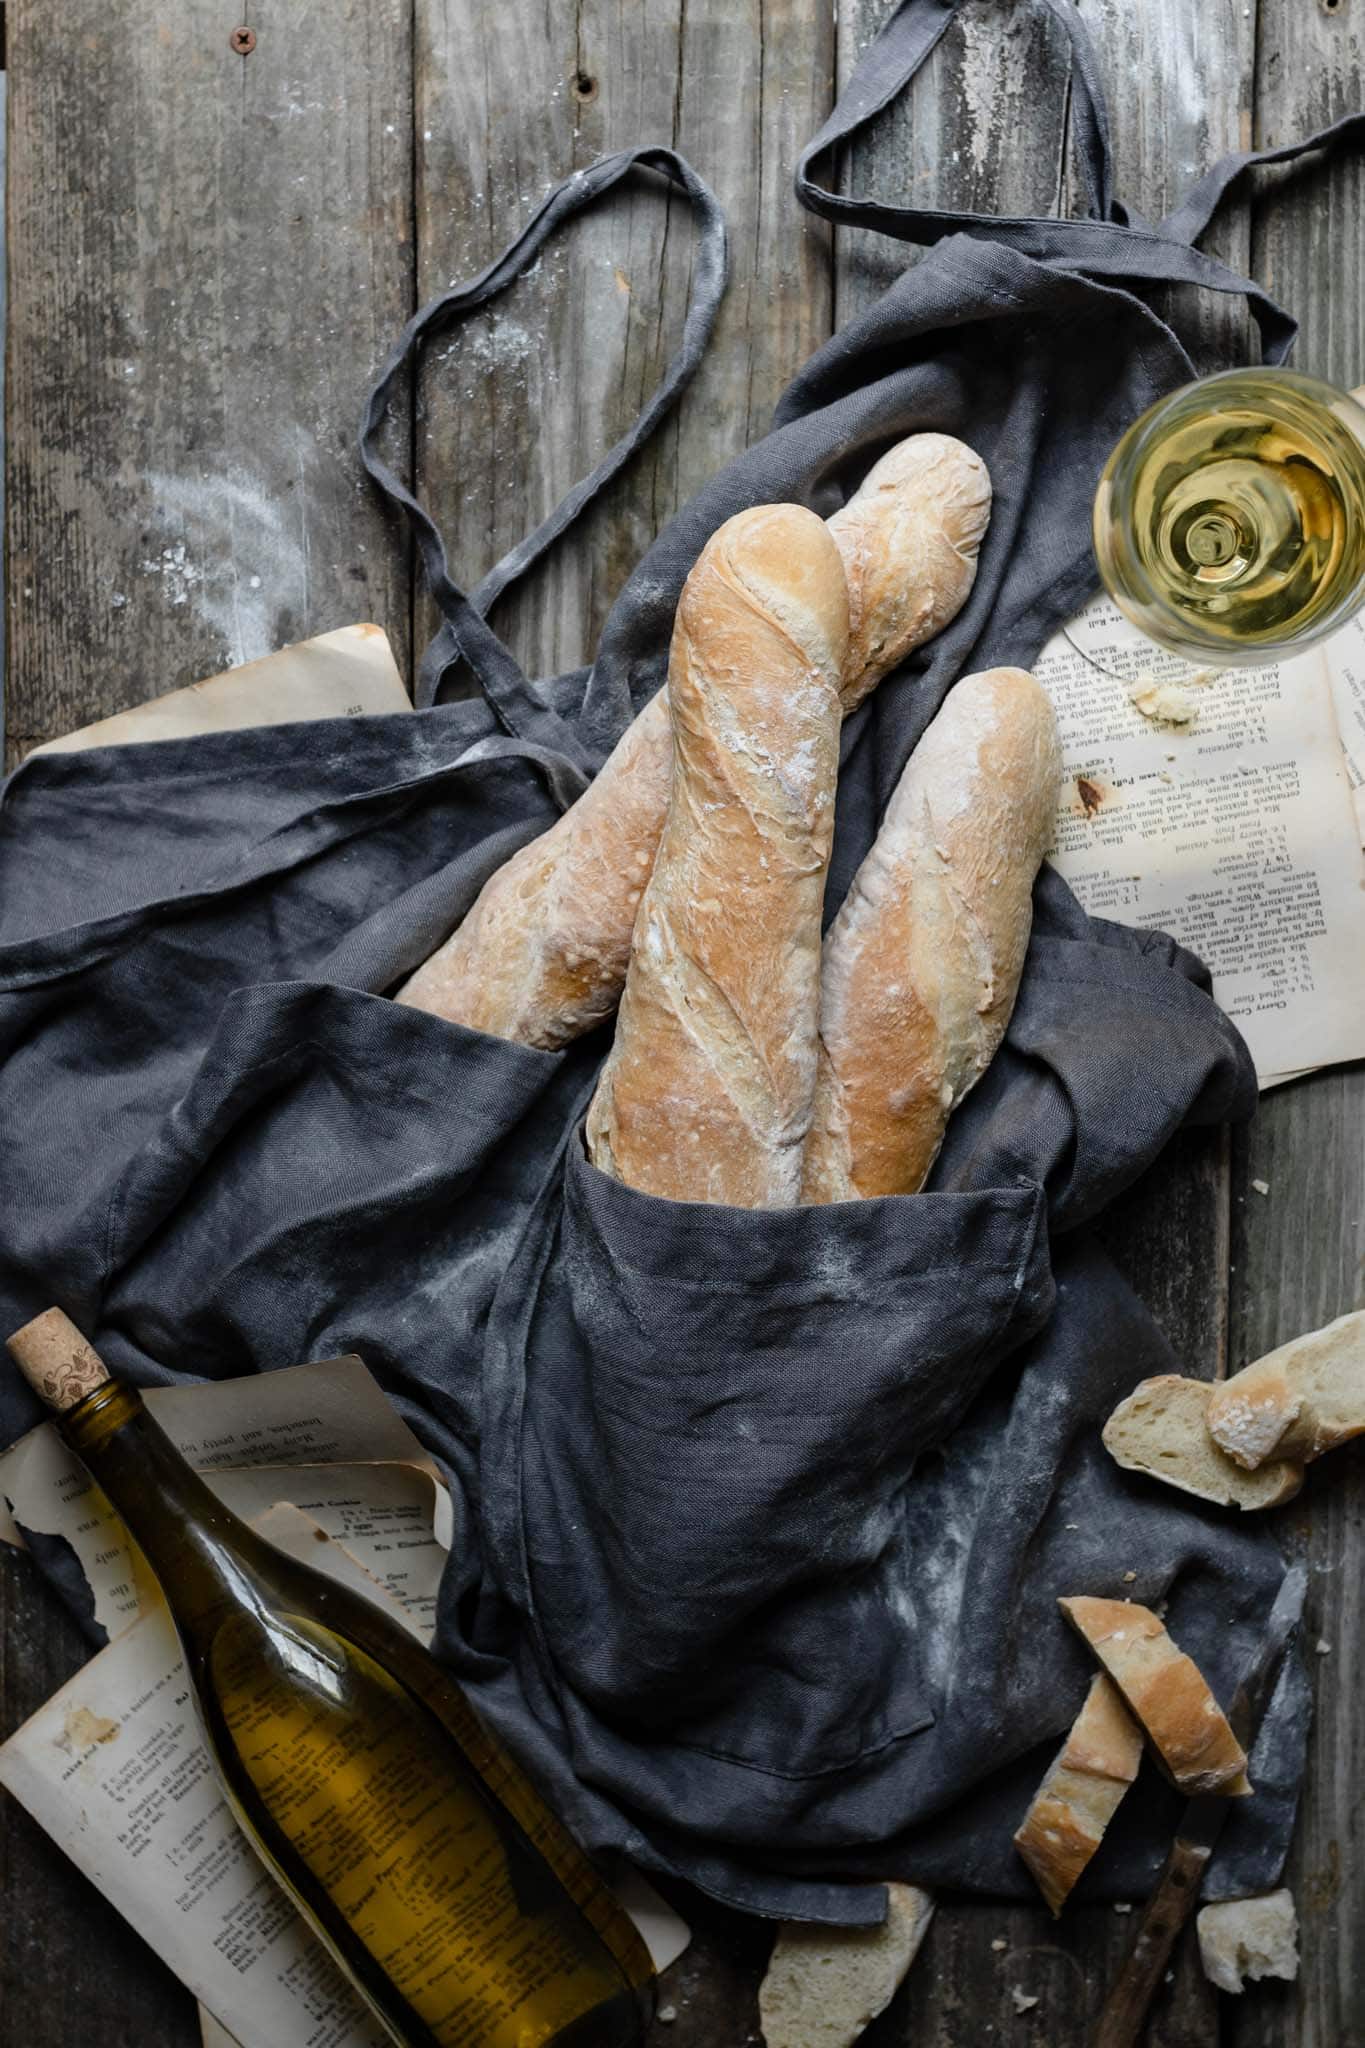 How to make French Baguettes from scratch served with wine.